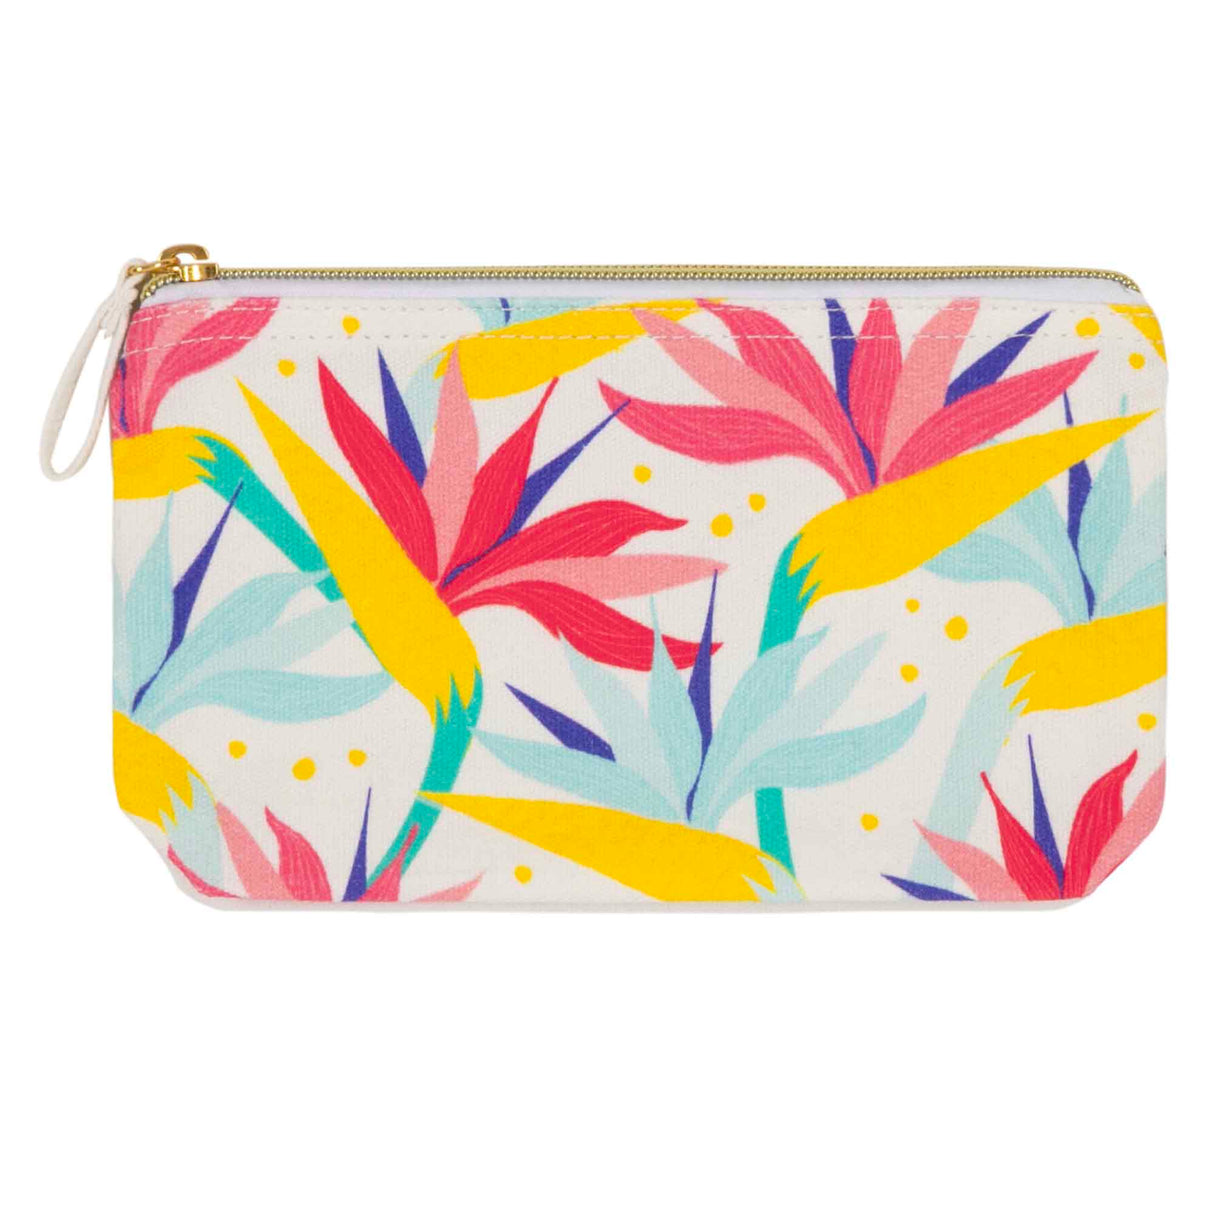 Exotic flower printed cotton pouch